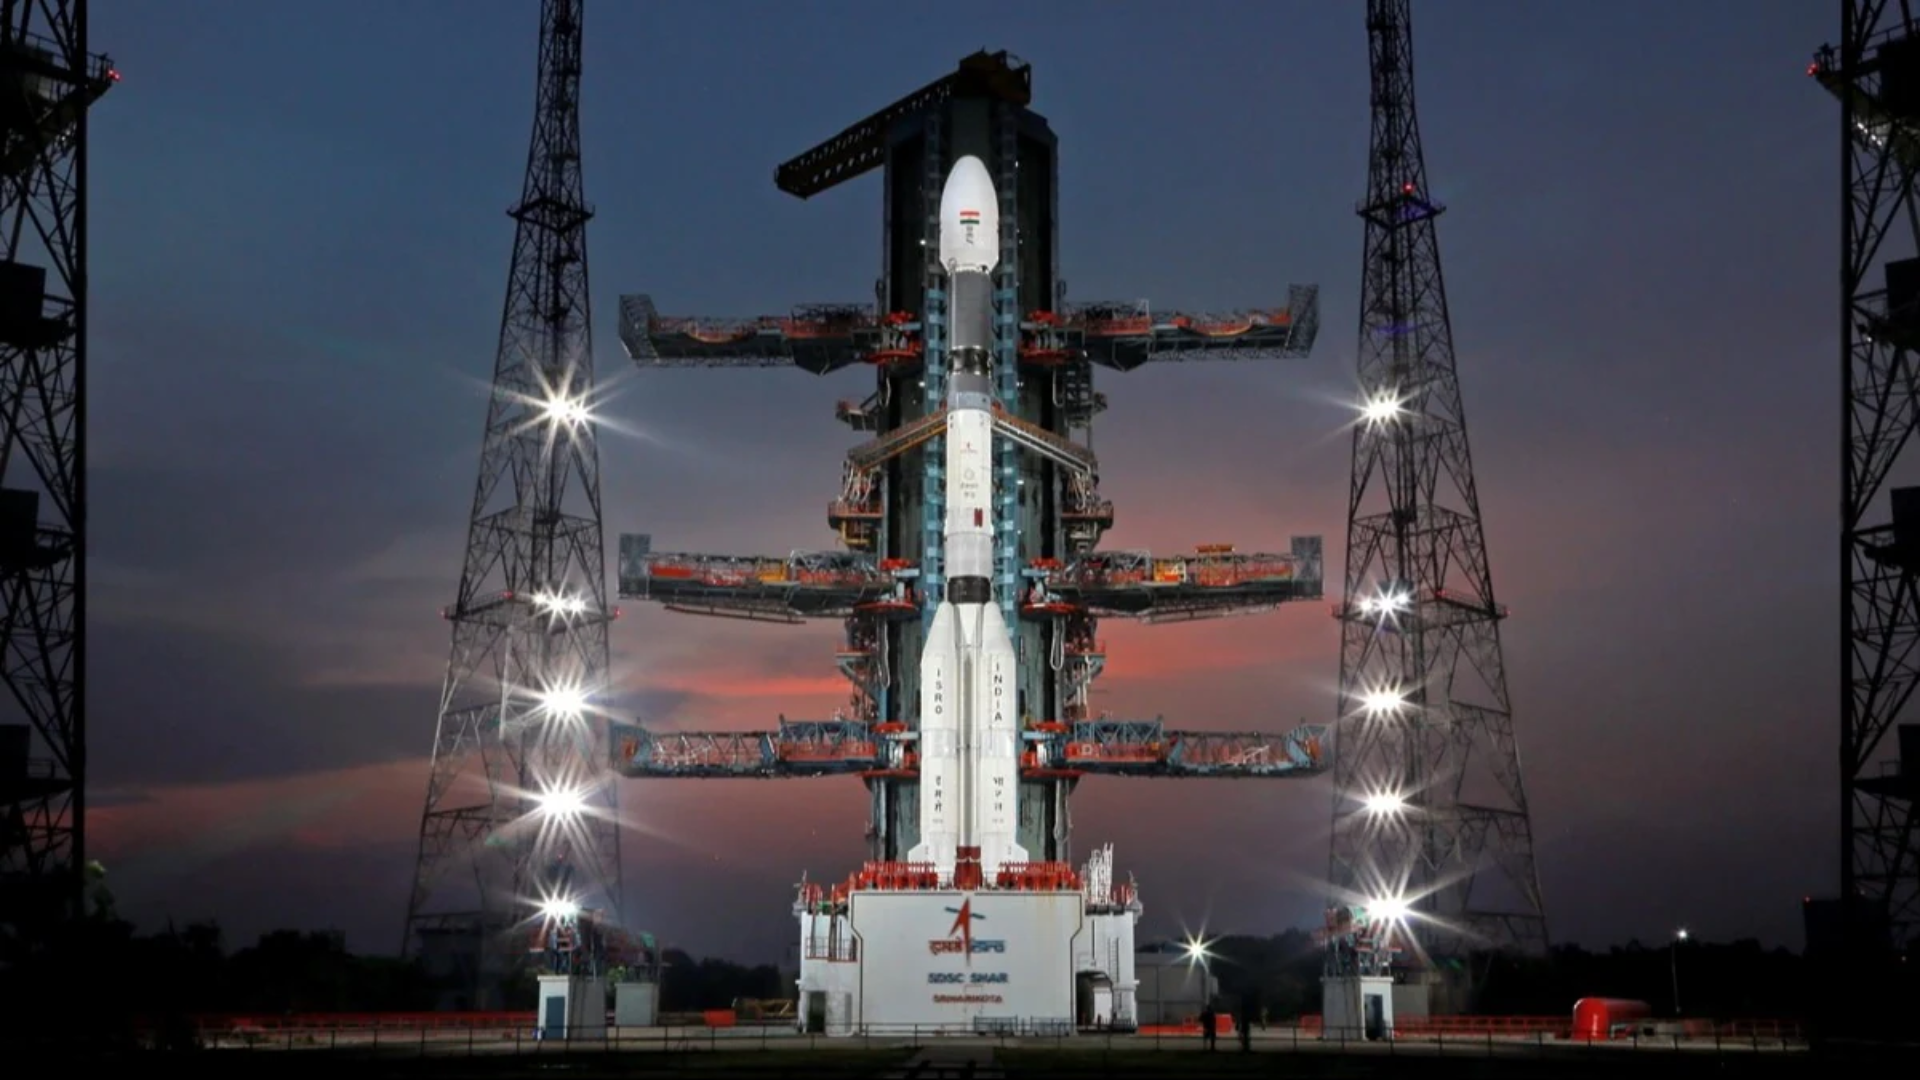 ISRO’s GSLV-F14 to Launch INSAT-3DS Satellite, Crucial Mission for “Naughty Boy” Rocket